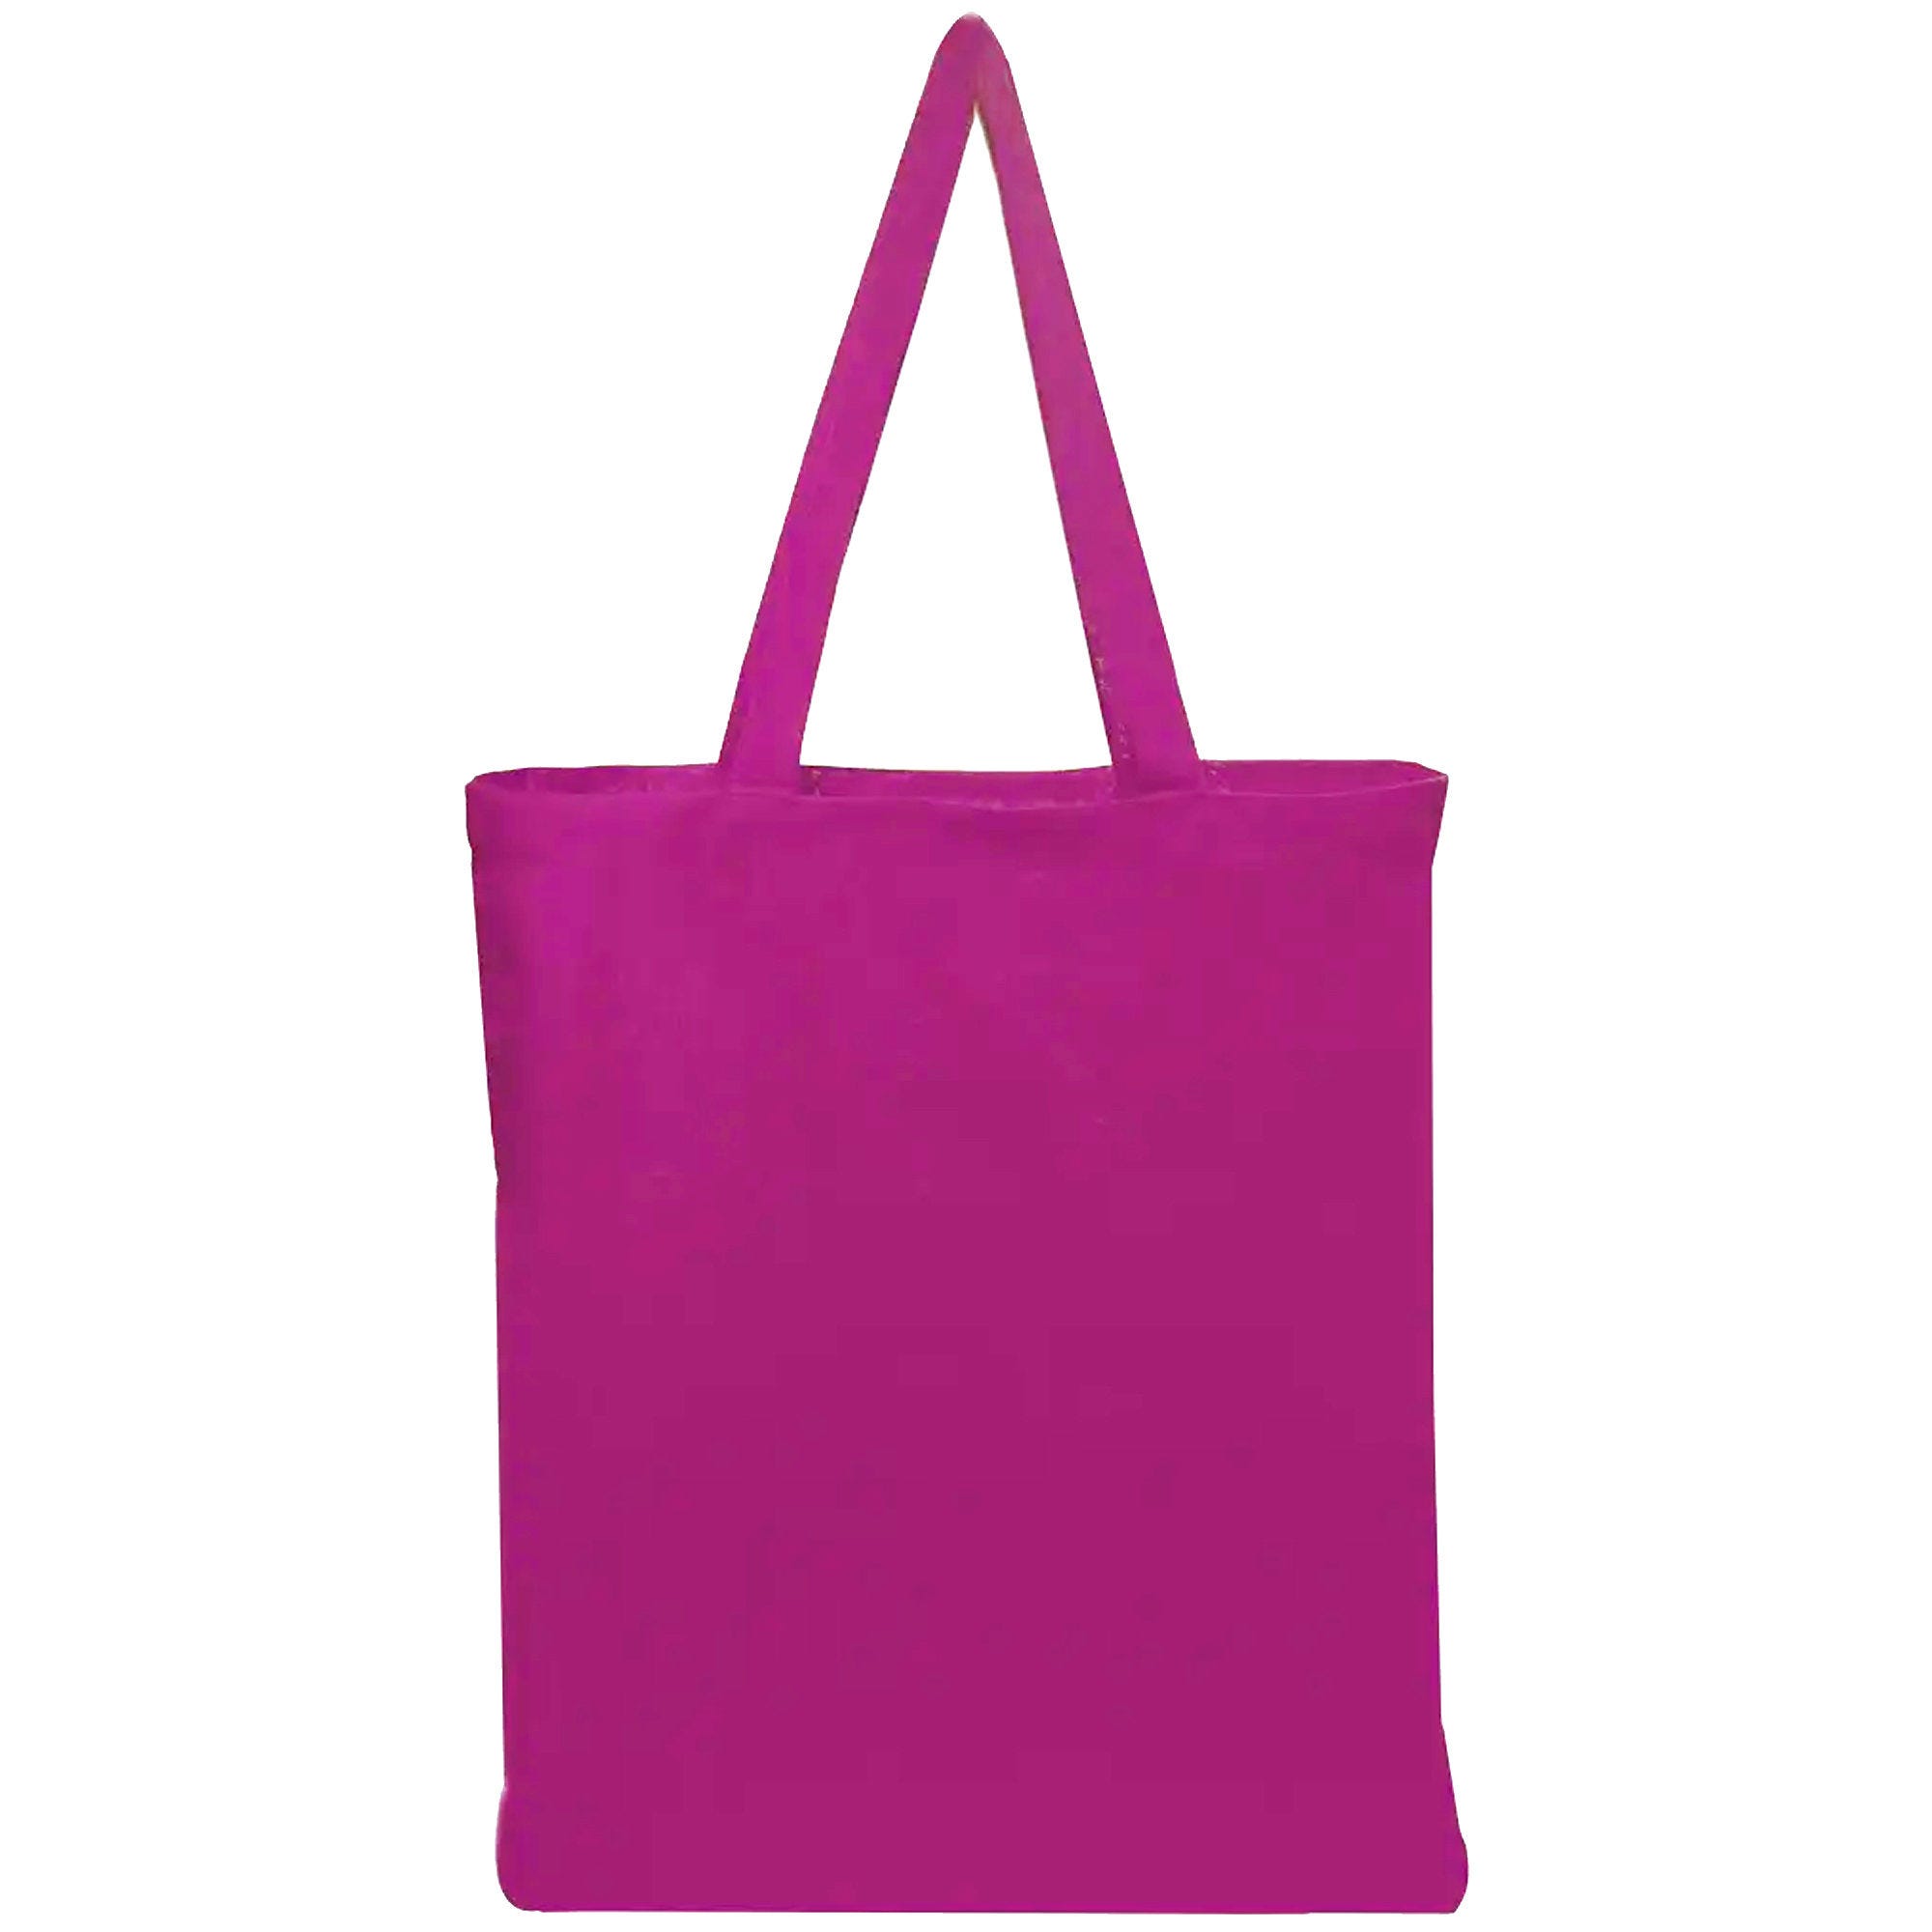 ''15 1/2'''' X 15'''' Canvas Tote Bag in Assorted Colors - Qty 34''